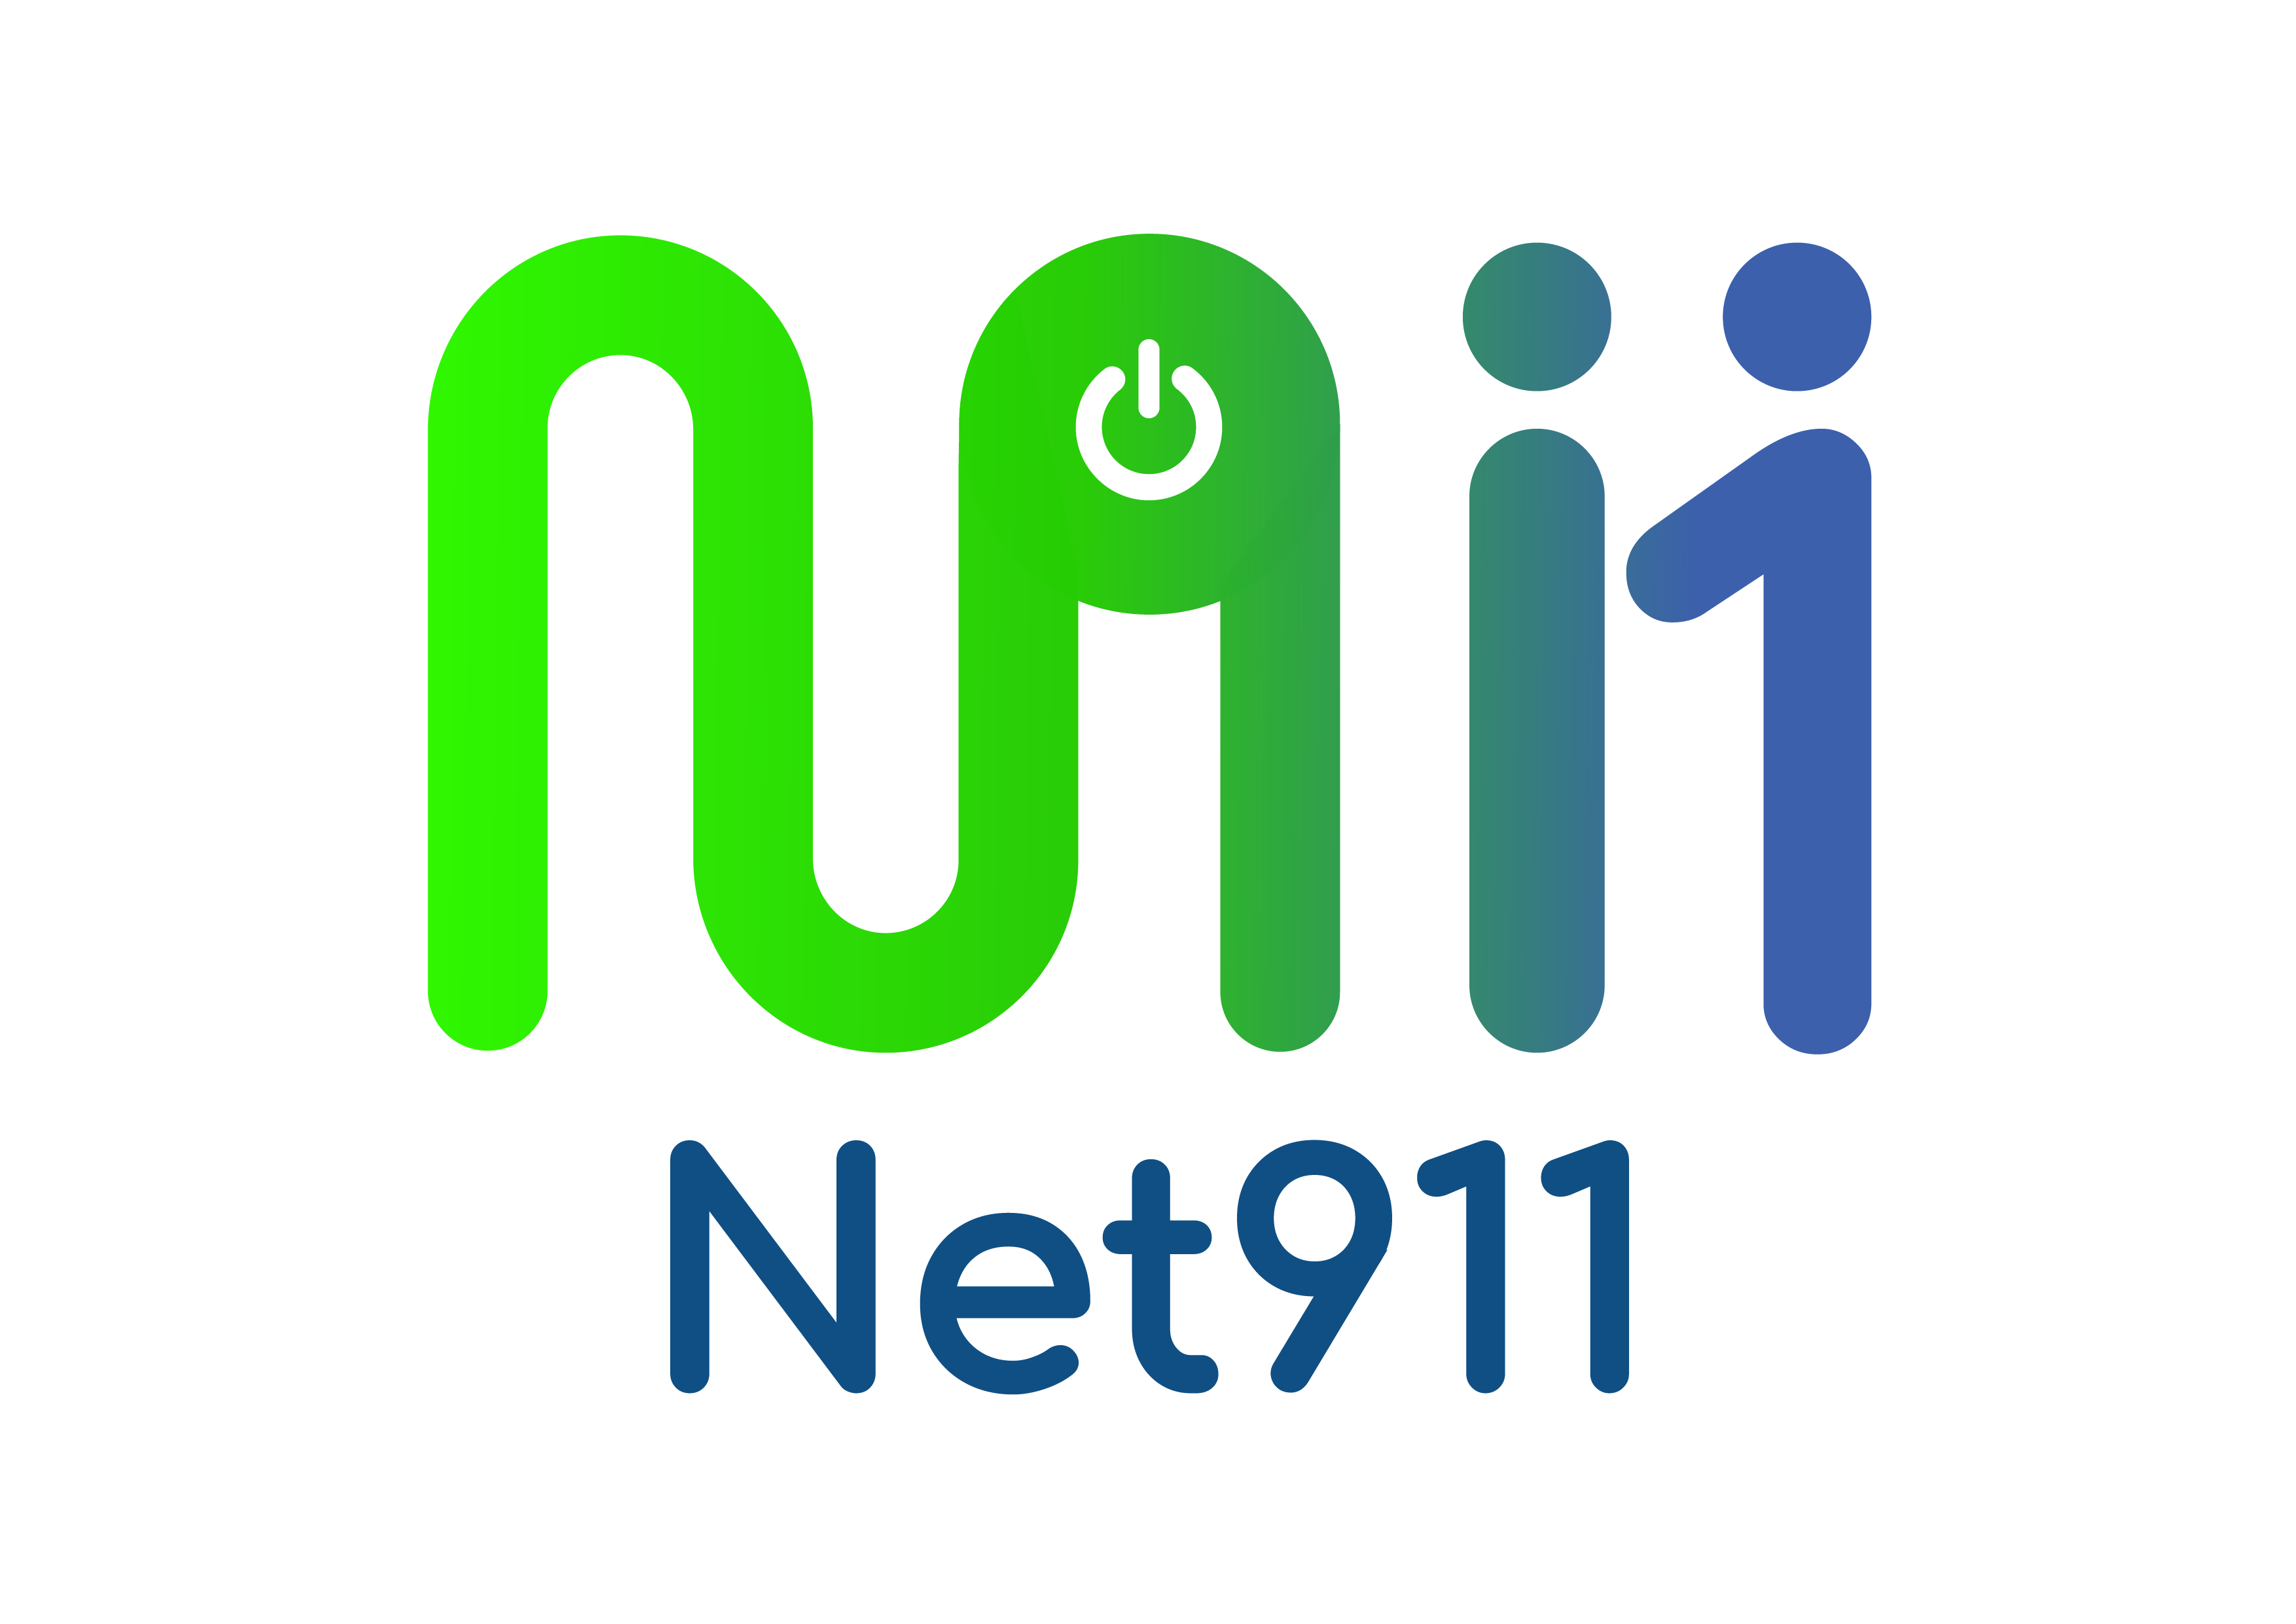 Net 911 HelpDesk support, onsite troubleshooting and case archiving, IT assets management